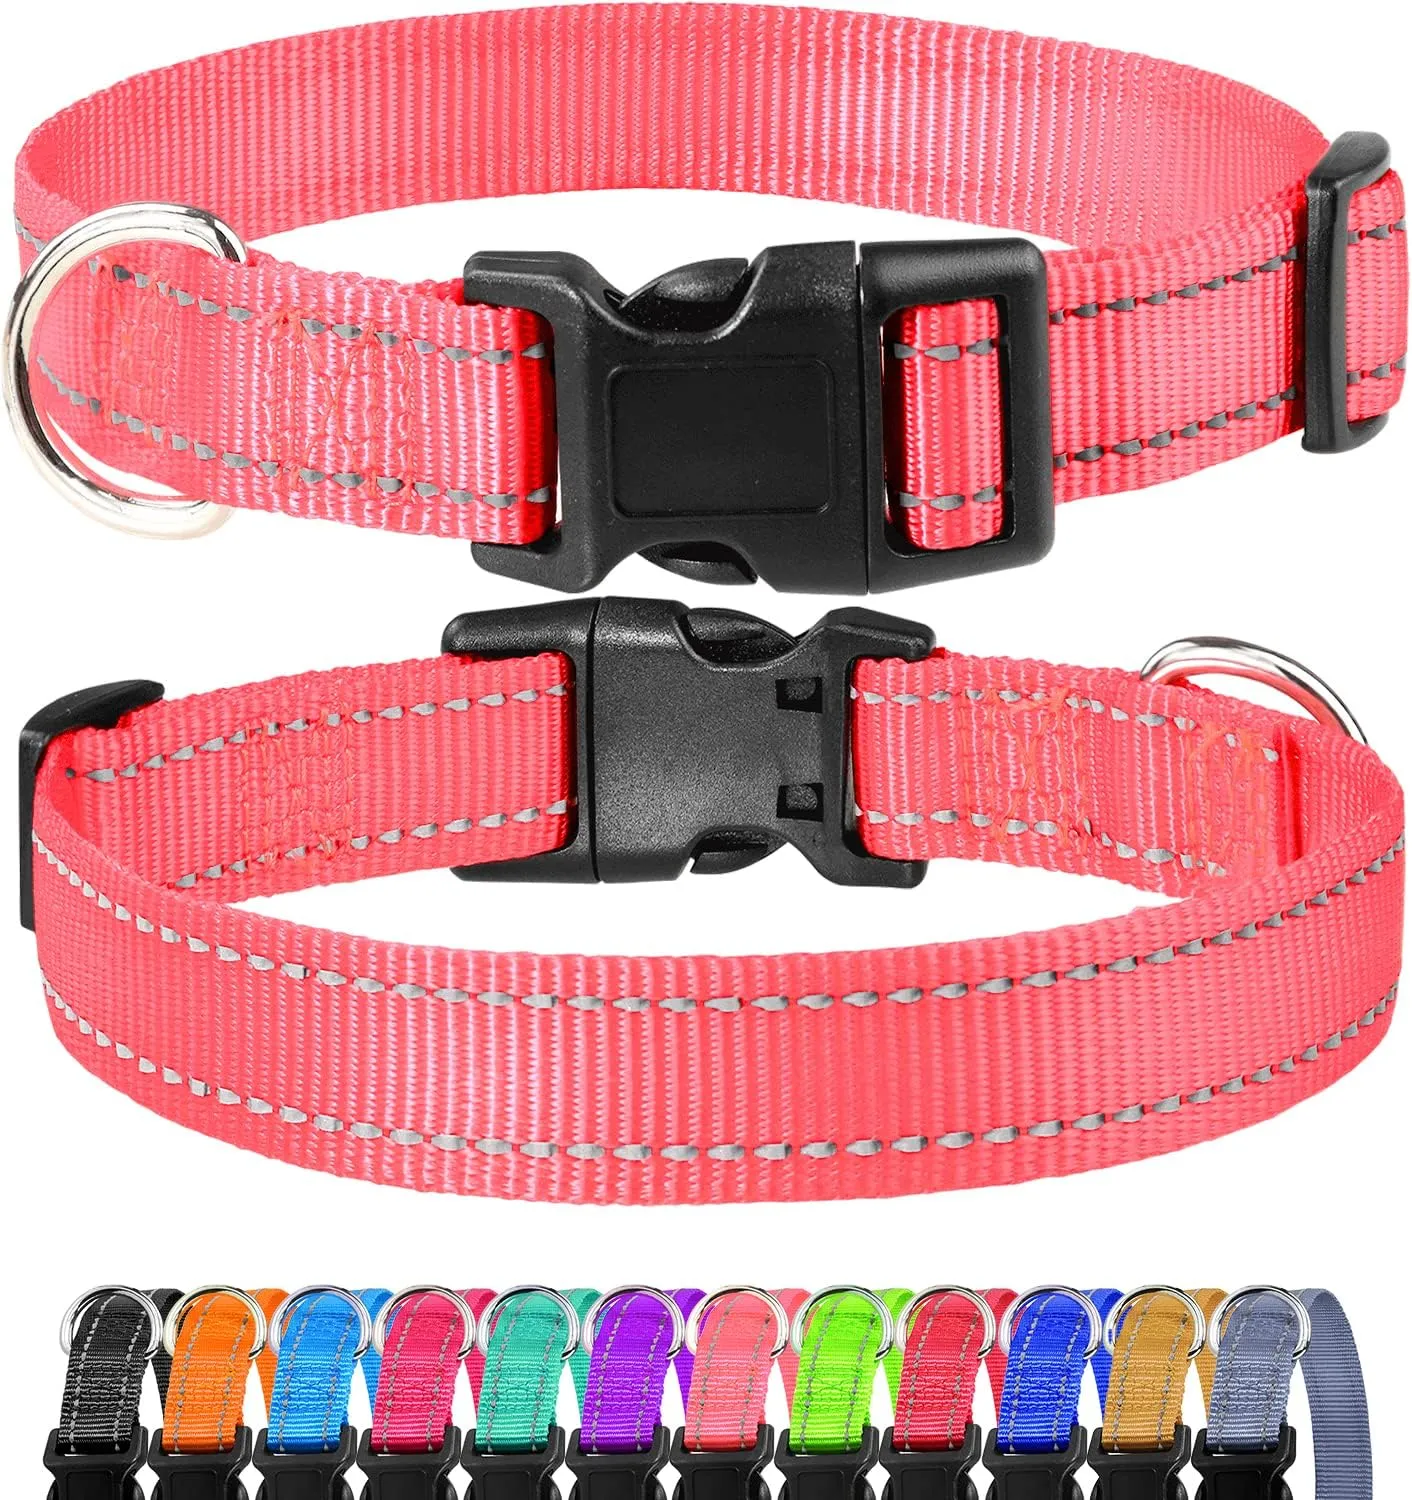 Taglory Reflective Adjustable Dog Collars for Puppy Small Medium Large Dogs